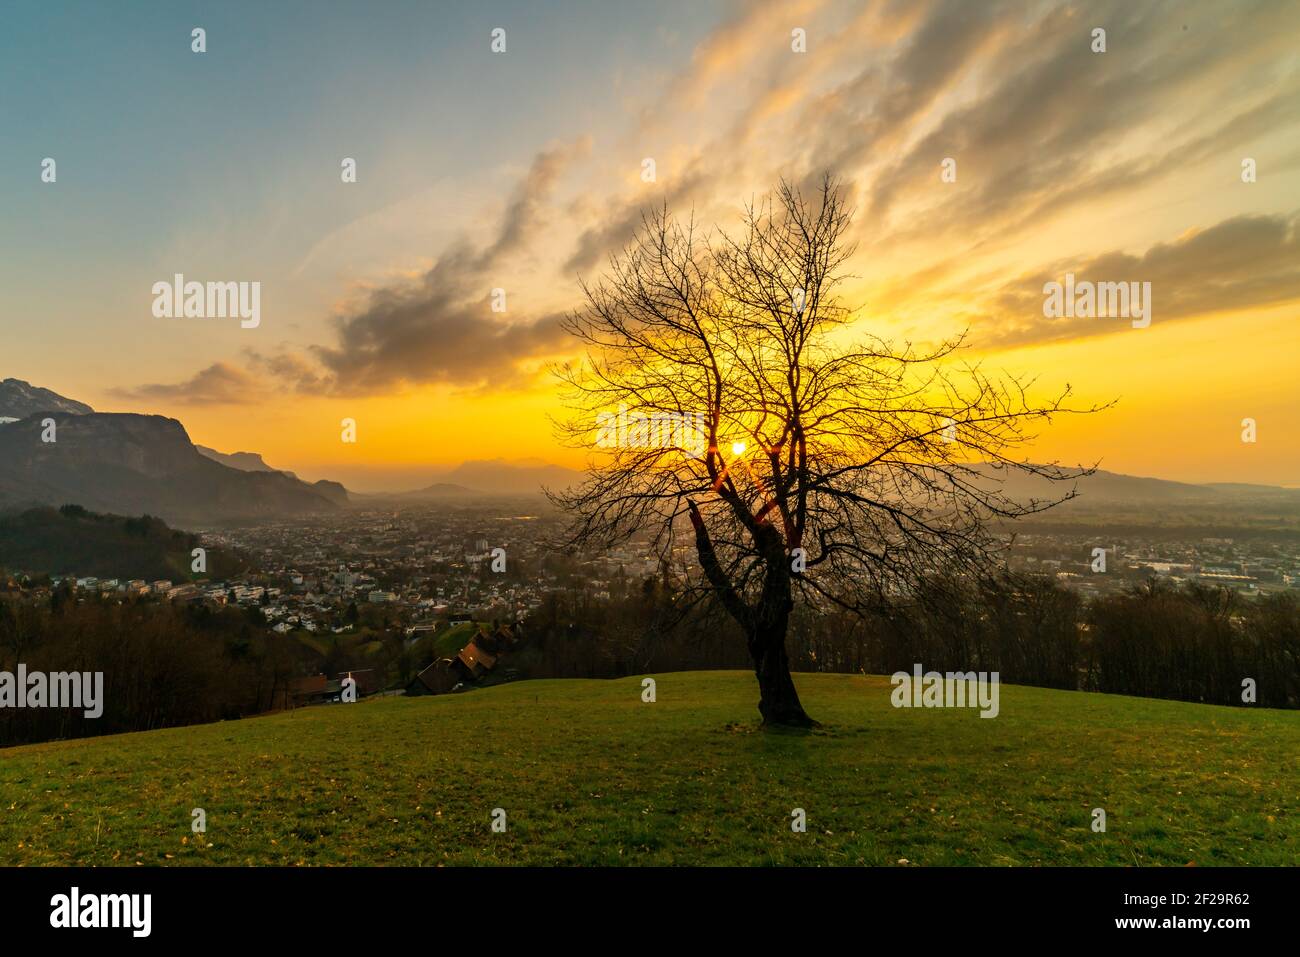 Sunset with afterglow over the Rhine valley. Dornbirn lies in the misty valley, Swiss mountains are above. single tree stands on the sloping meadow Stock Photo